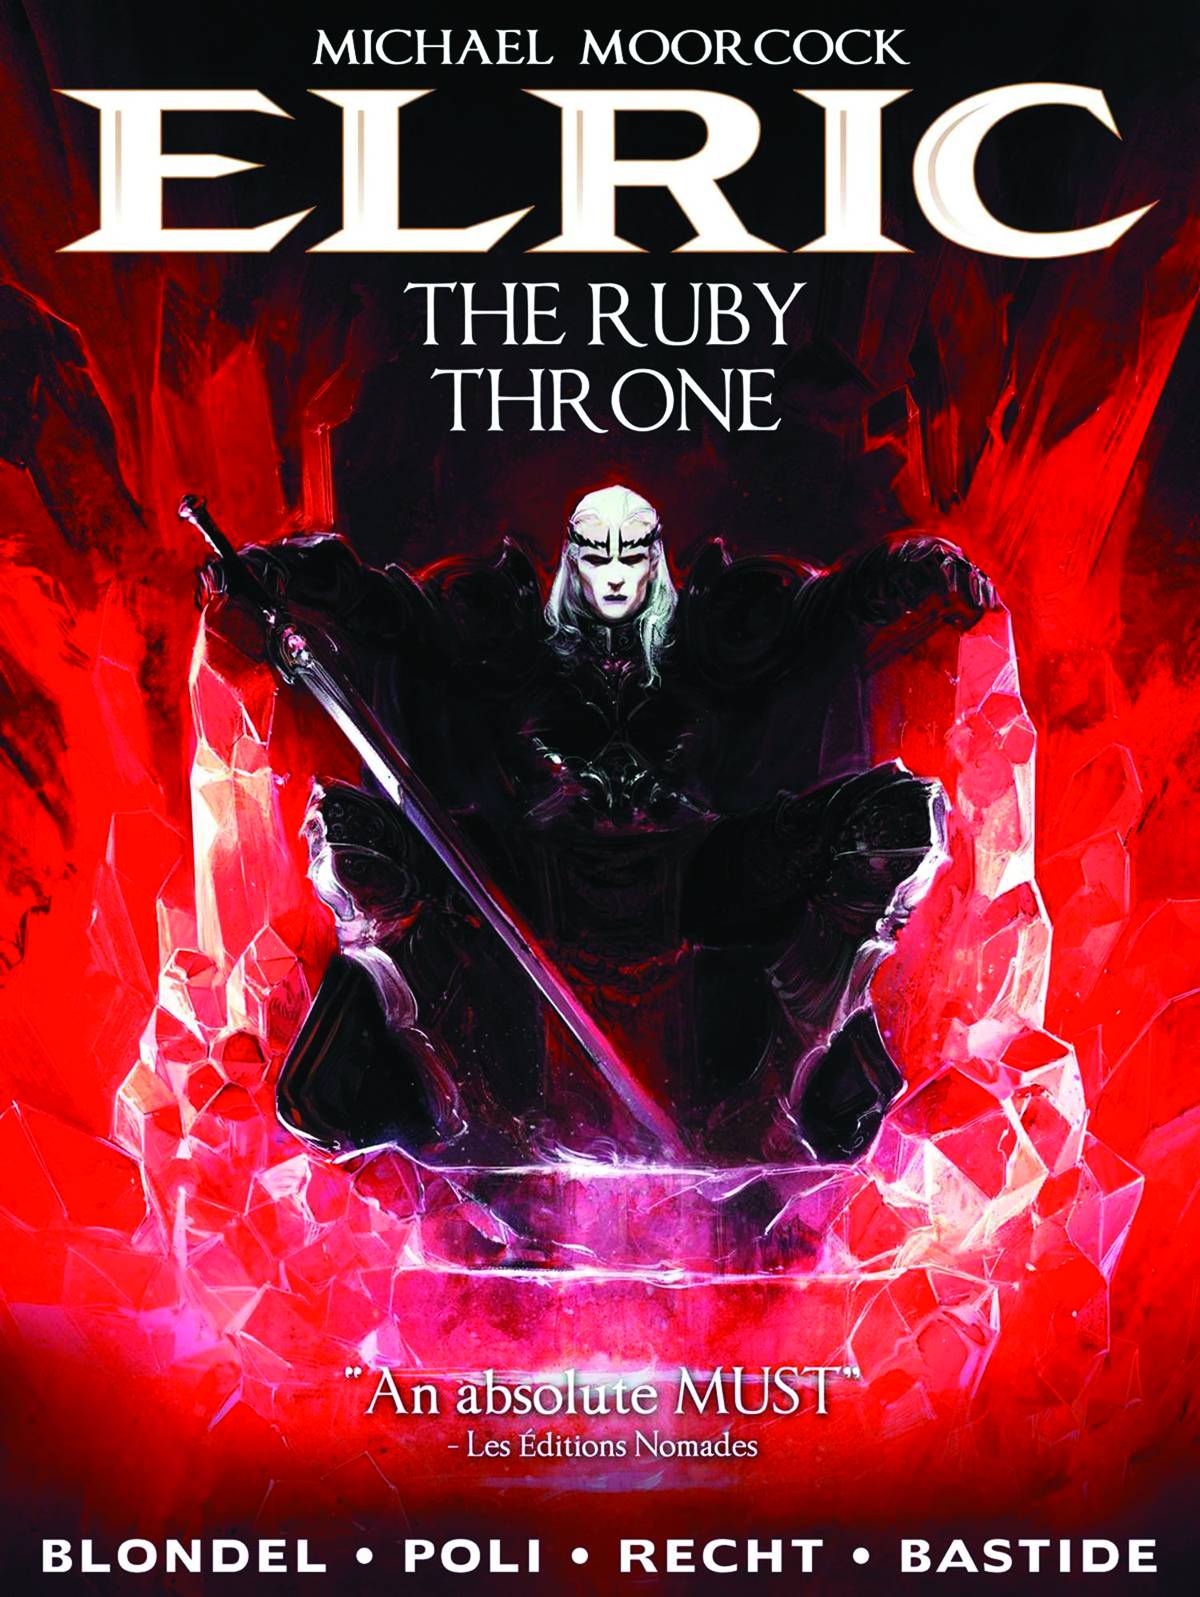 Michael Moorcock Elric Hardcover Volume 1 Ruby Throne